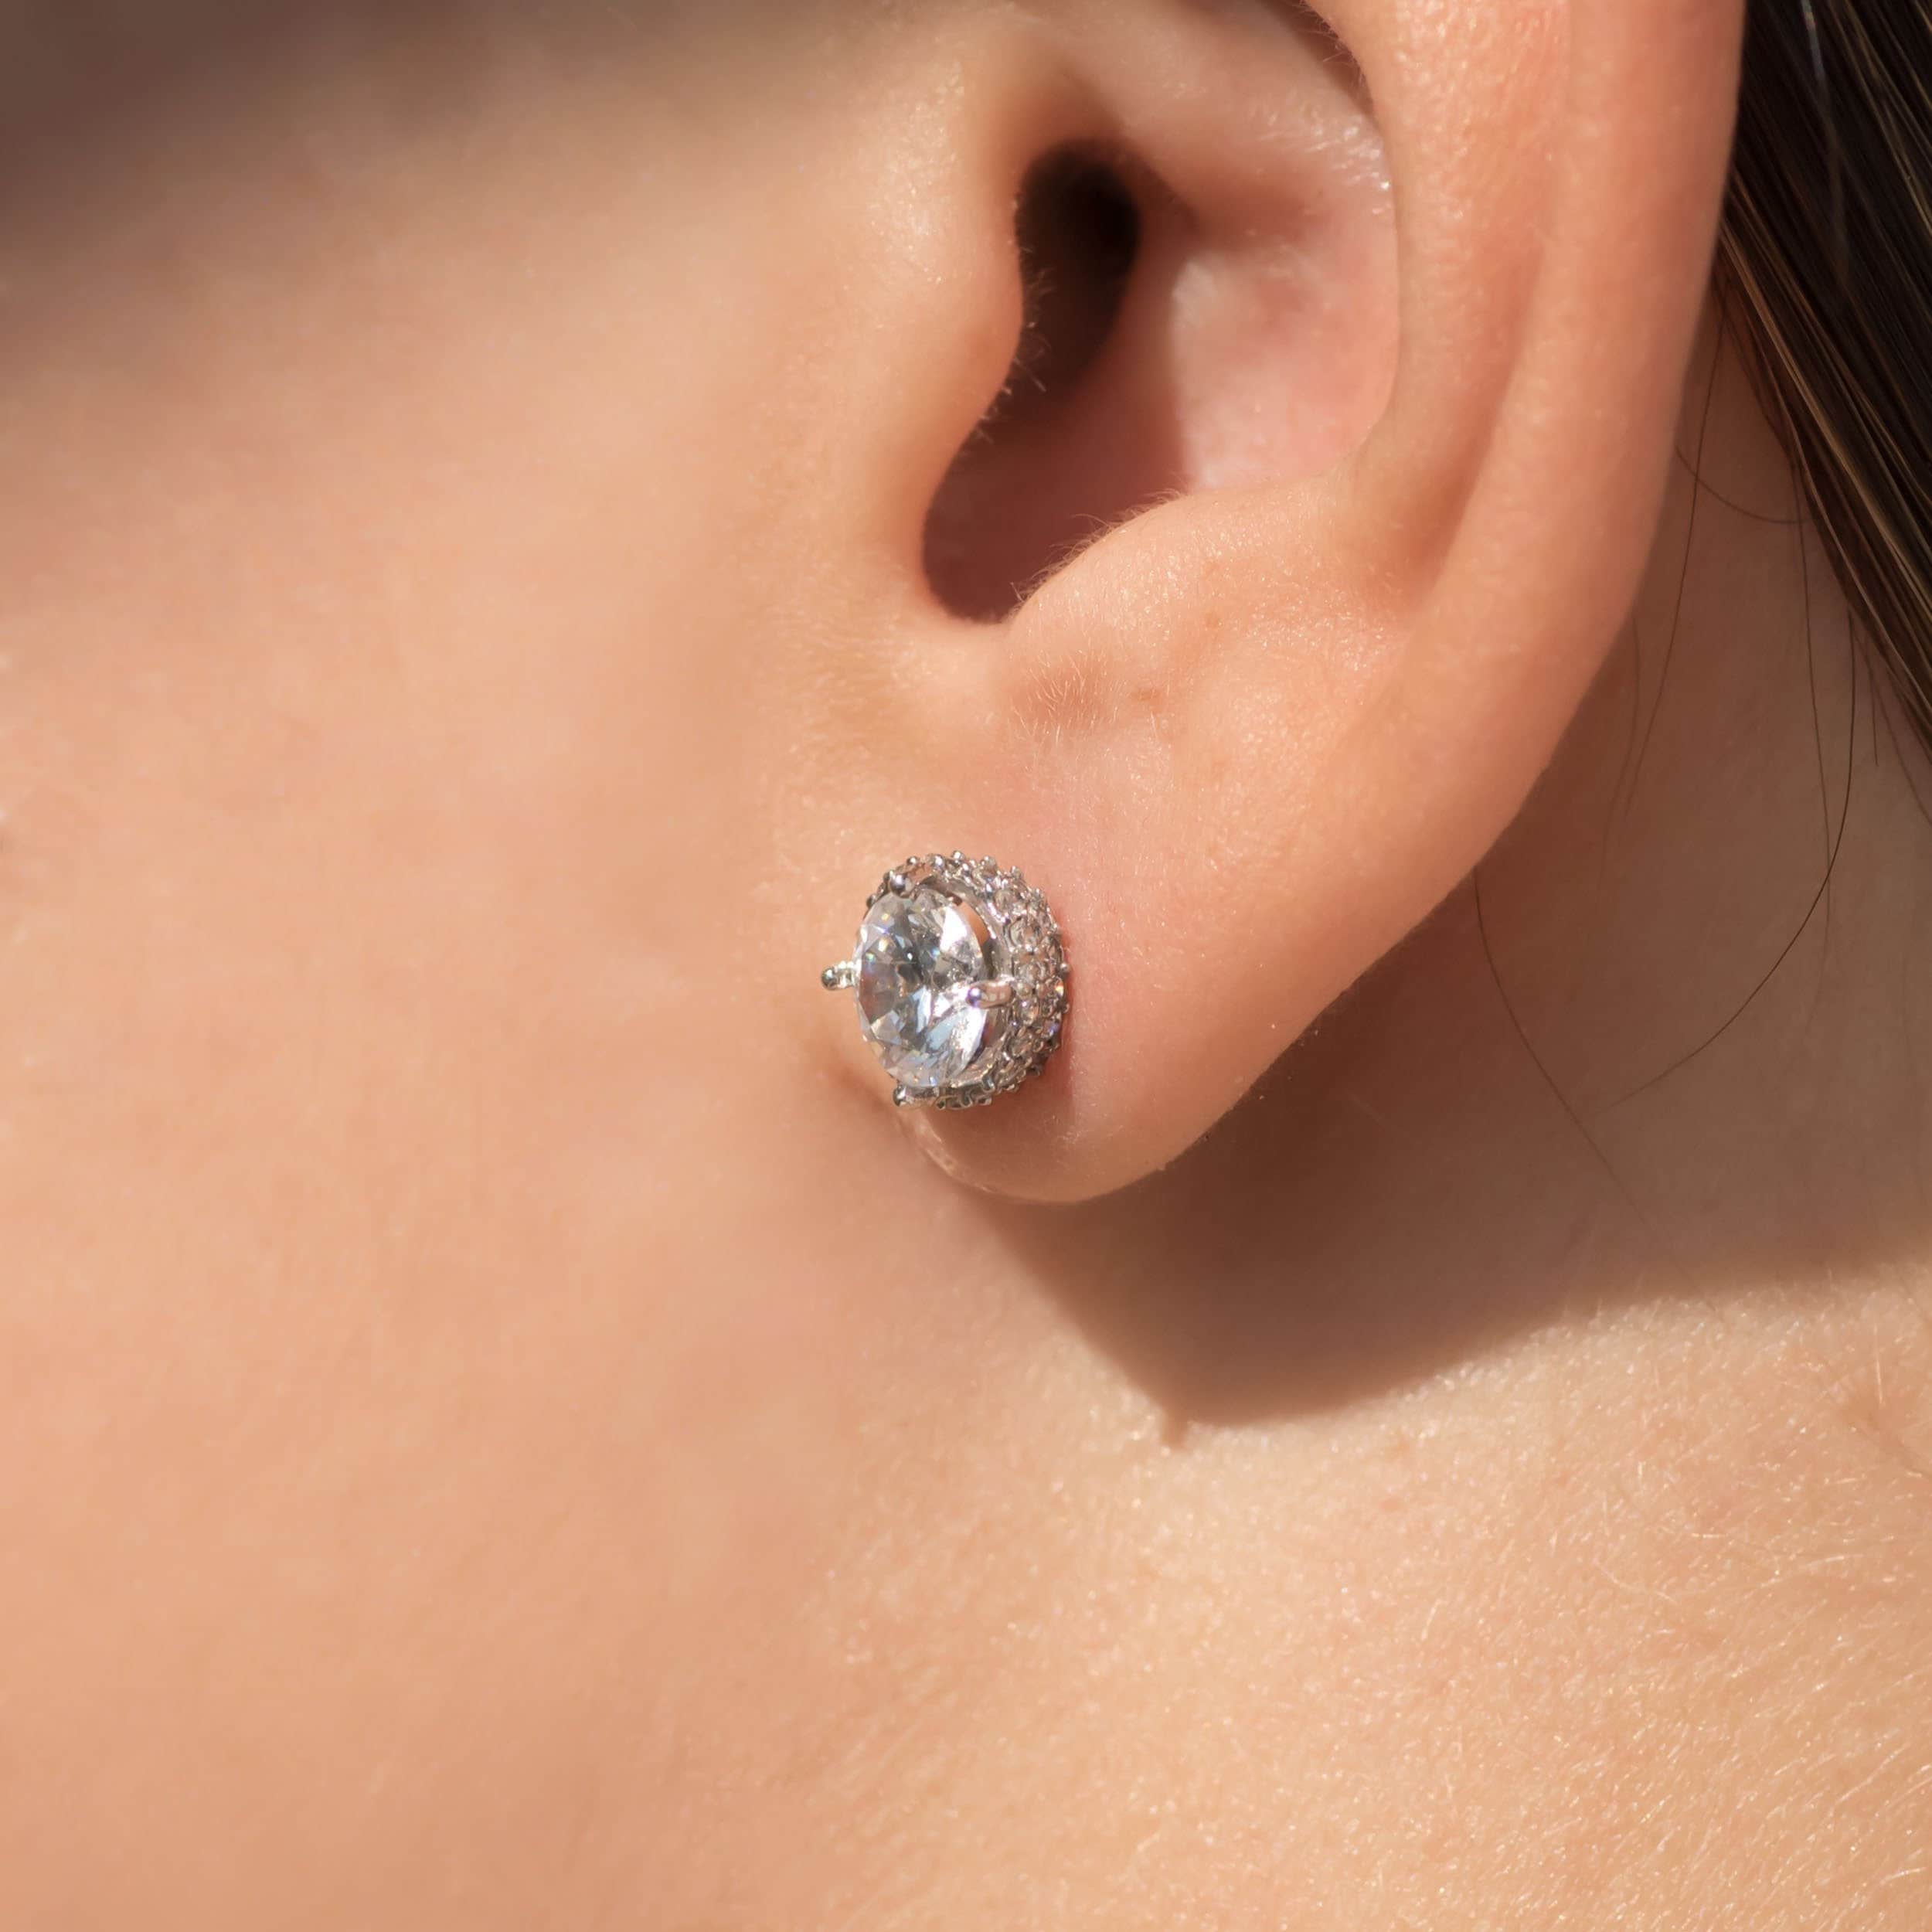 What is an Ideal Size for Diamond Stud Earrings? - DiamondStuds News | Diamond  earrings studs, Diamond studs, 1 carat diamond earrings